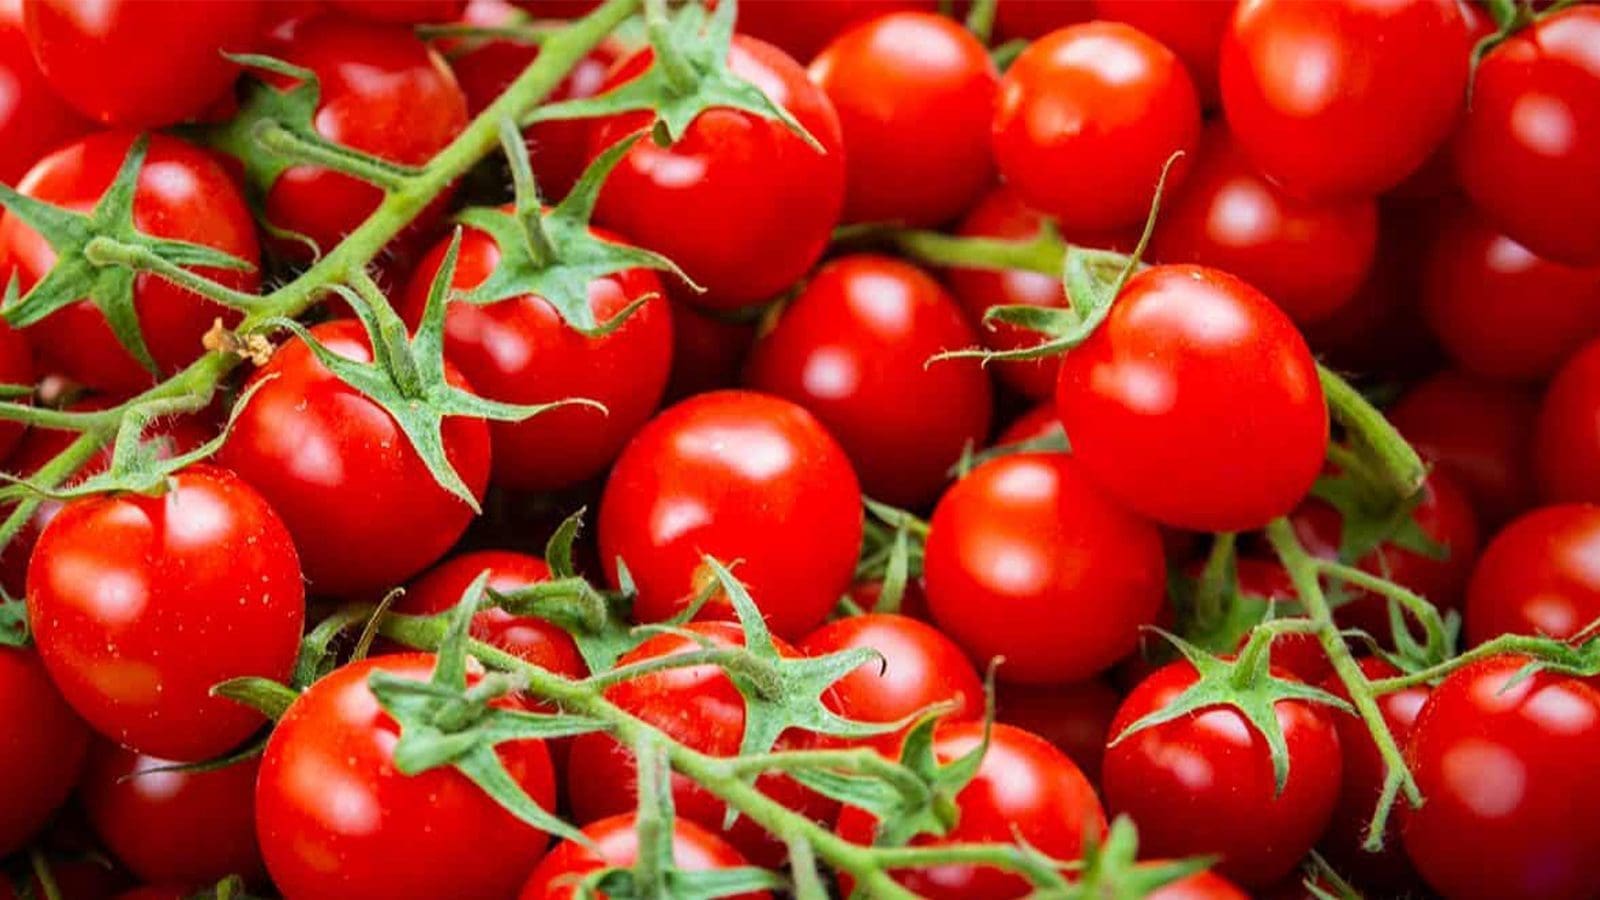 Salmonella outbreak linked to cherry tomatoes sparks global concern, ECDC,  EFSA launch joint investigation